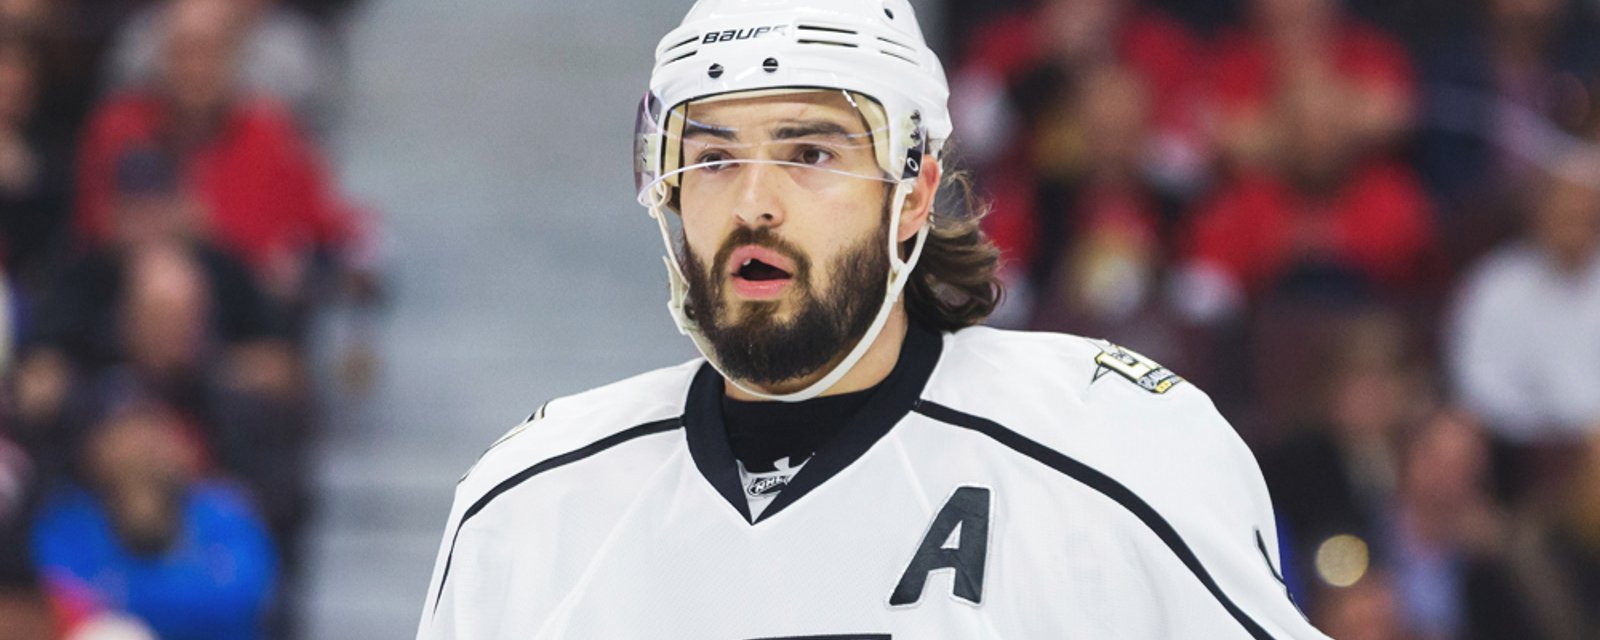 Drew Doughty has unexpected comments on the Toronto Maple Leafs.